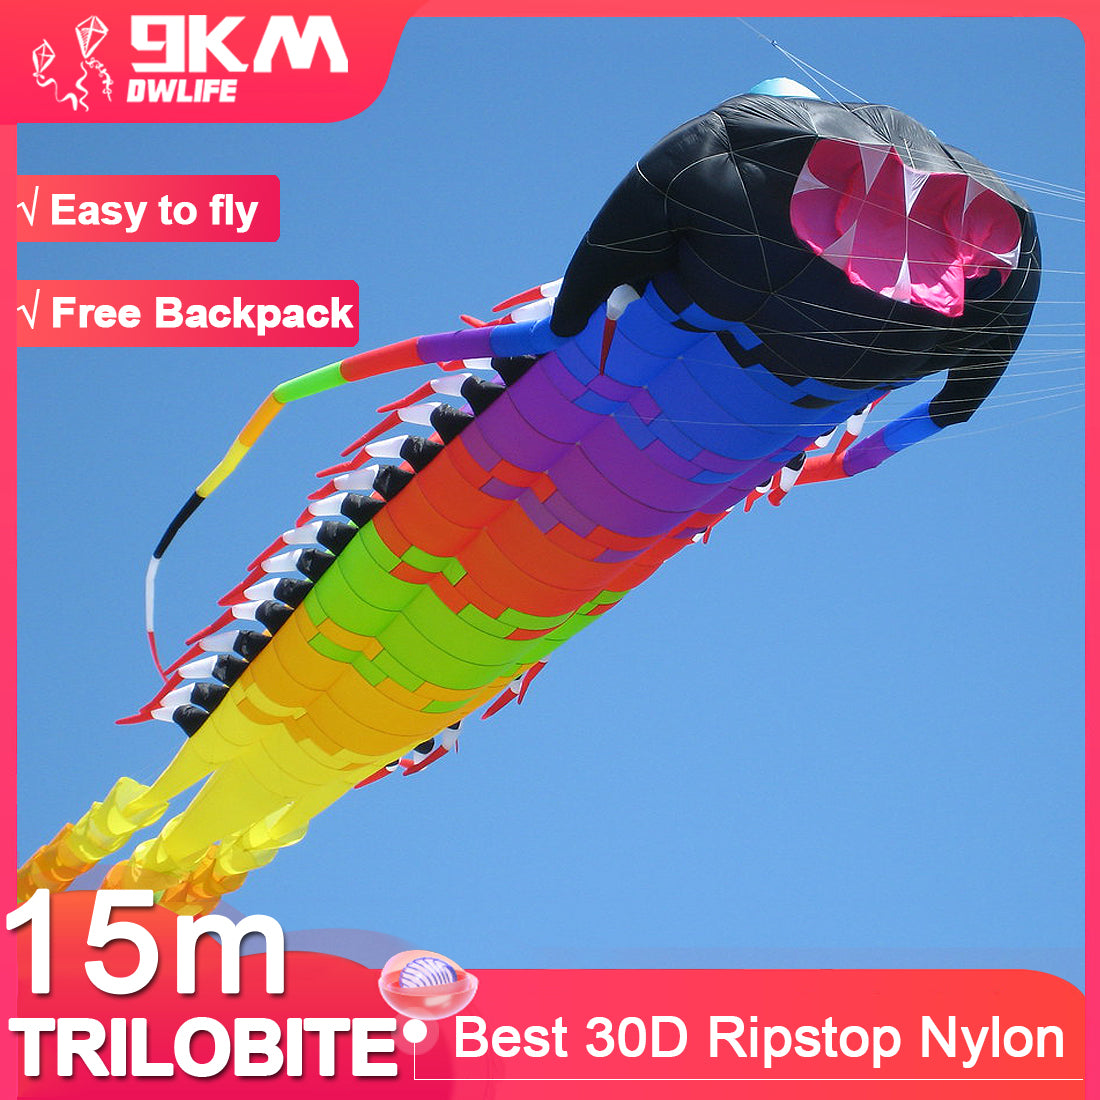 15m Ancient Trilobite Kite Line Laundry Kite Soft Inflatable with Bag